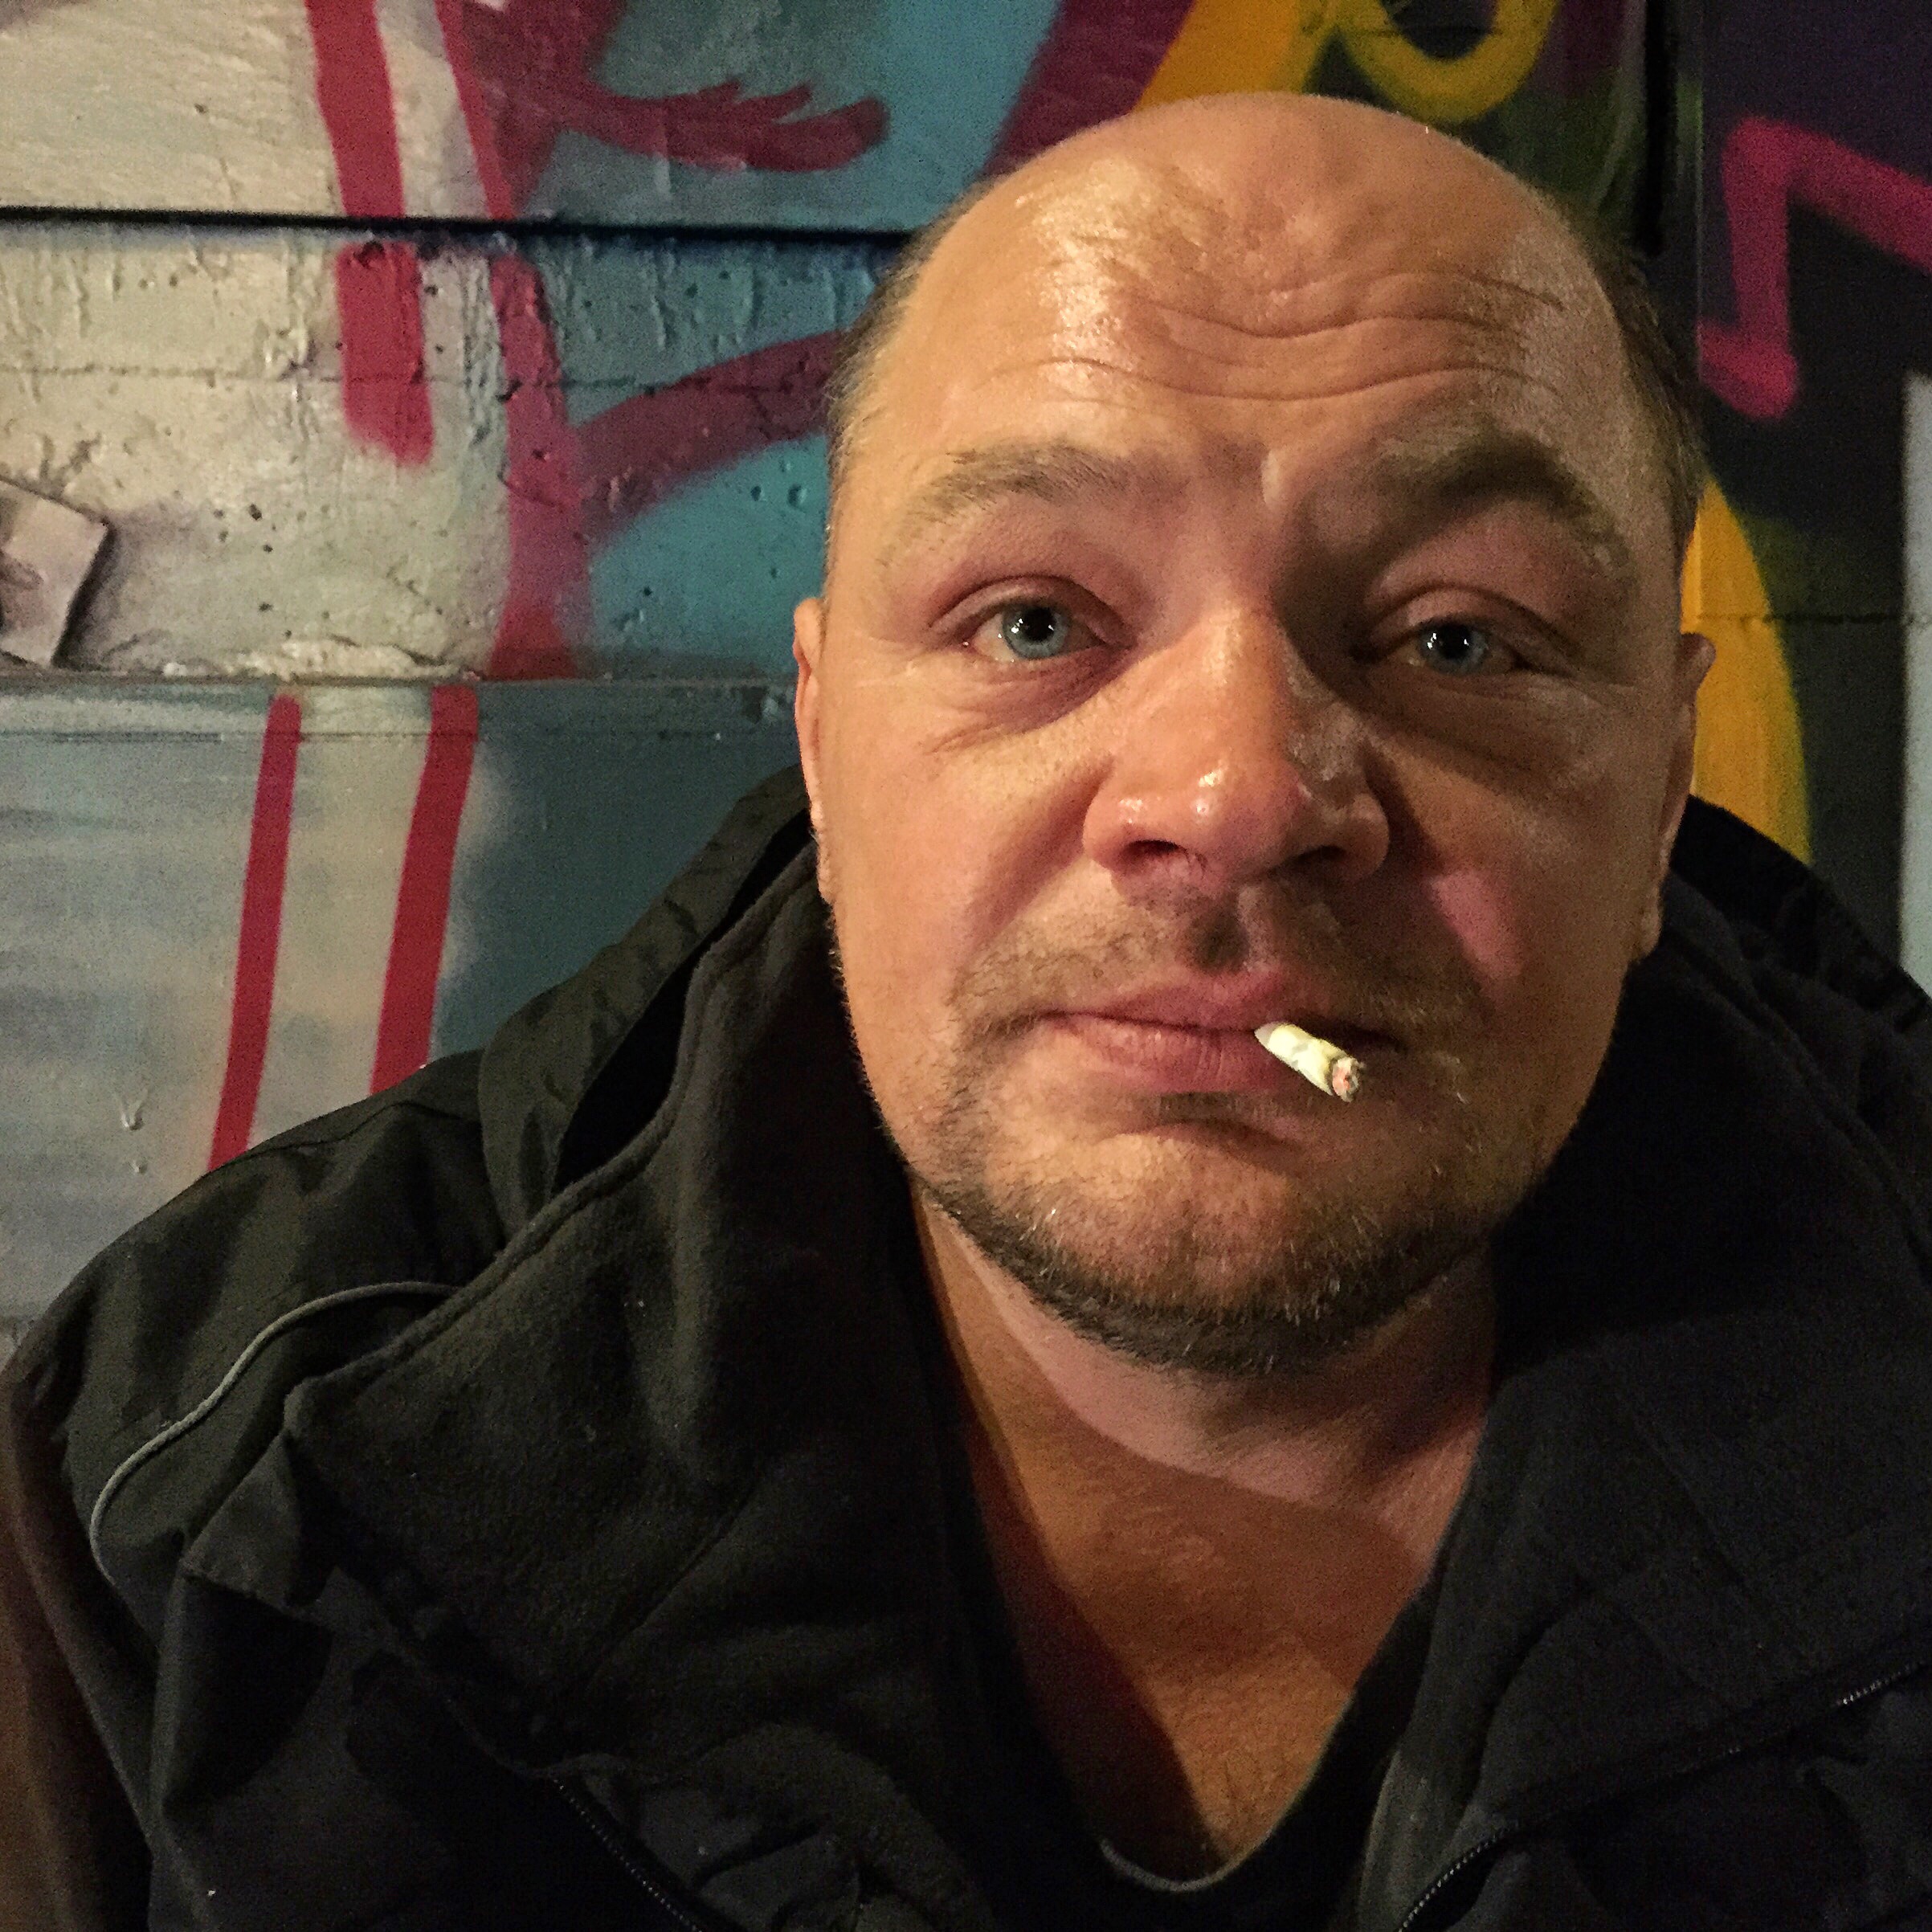 Modestas Primantas. Modistes has been in the UK for 18 years. Originally from Lithuania, he's worked full time as a builder for 16 of these years before his epilepsy became uncontrollable. He's been on the streets for two years. He has been told he's not entitled to benefits. He seems to feel as anonymous as the 7-digit hospital number on his wrist '2132232'